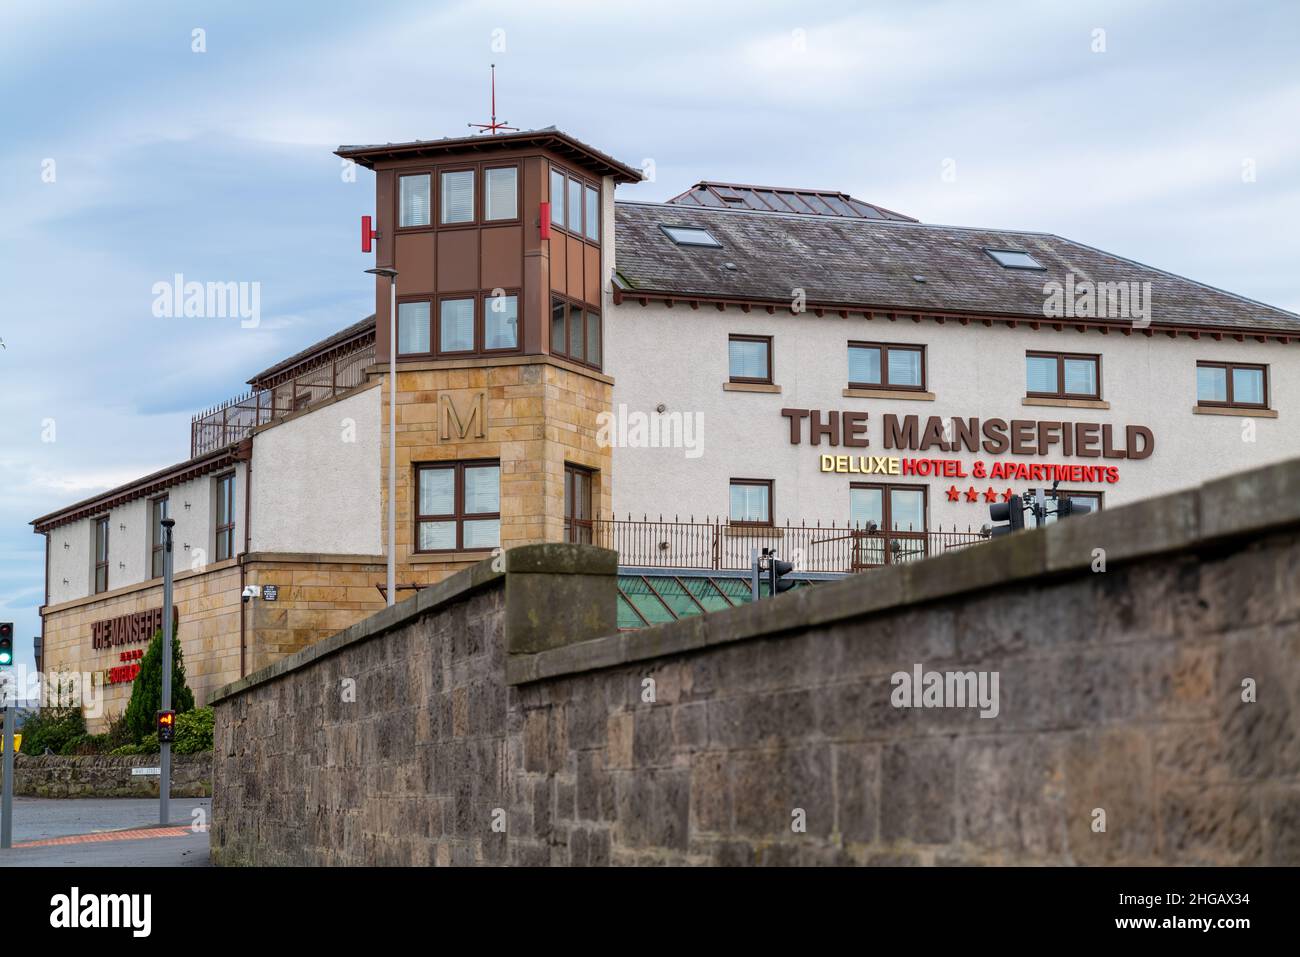 ELGIN, MORAY, SCOTLAND - 12 JANUARY 2021: - This is the exterior and public view of the Mansefield Hotel in Elgin, Moray, Scotland on 12 January 2022. Stock Photo